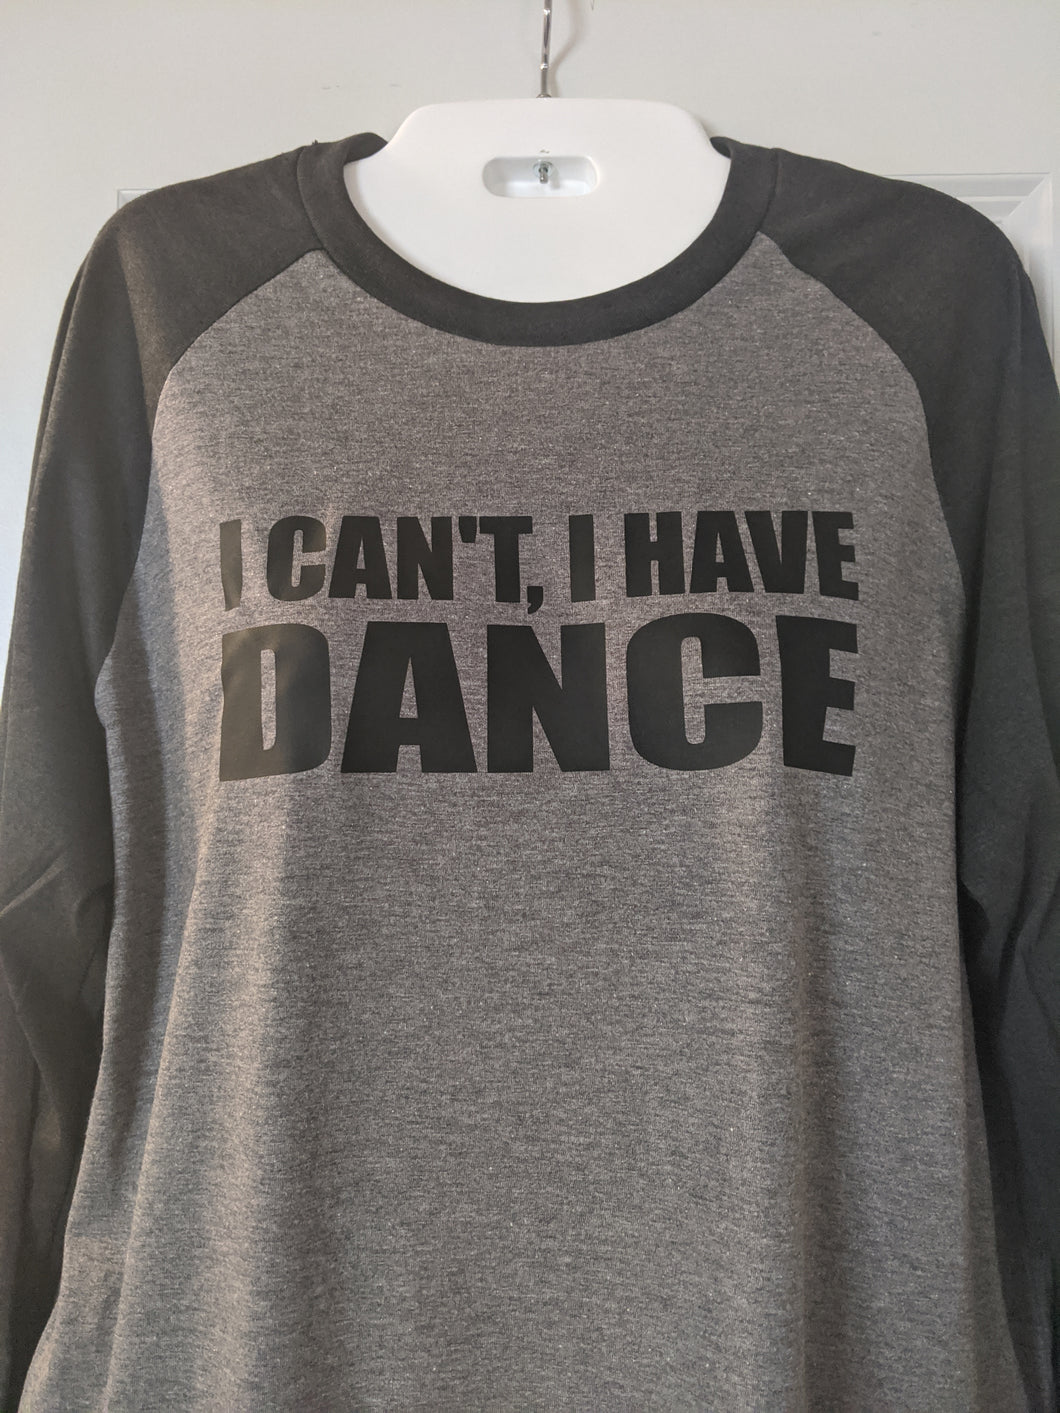 I Can't, I Have DANCE